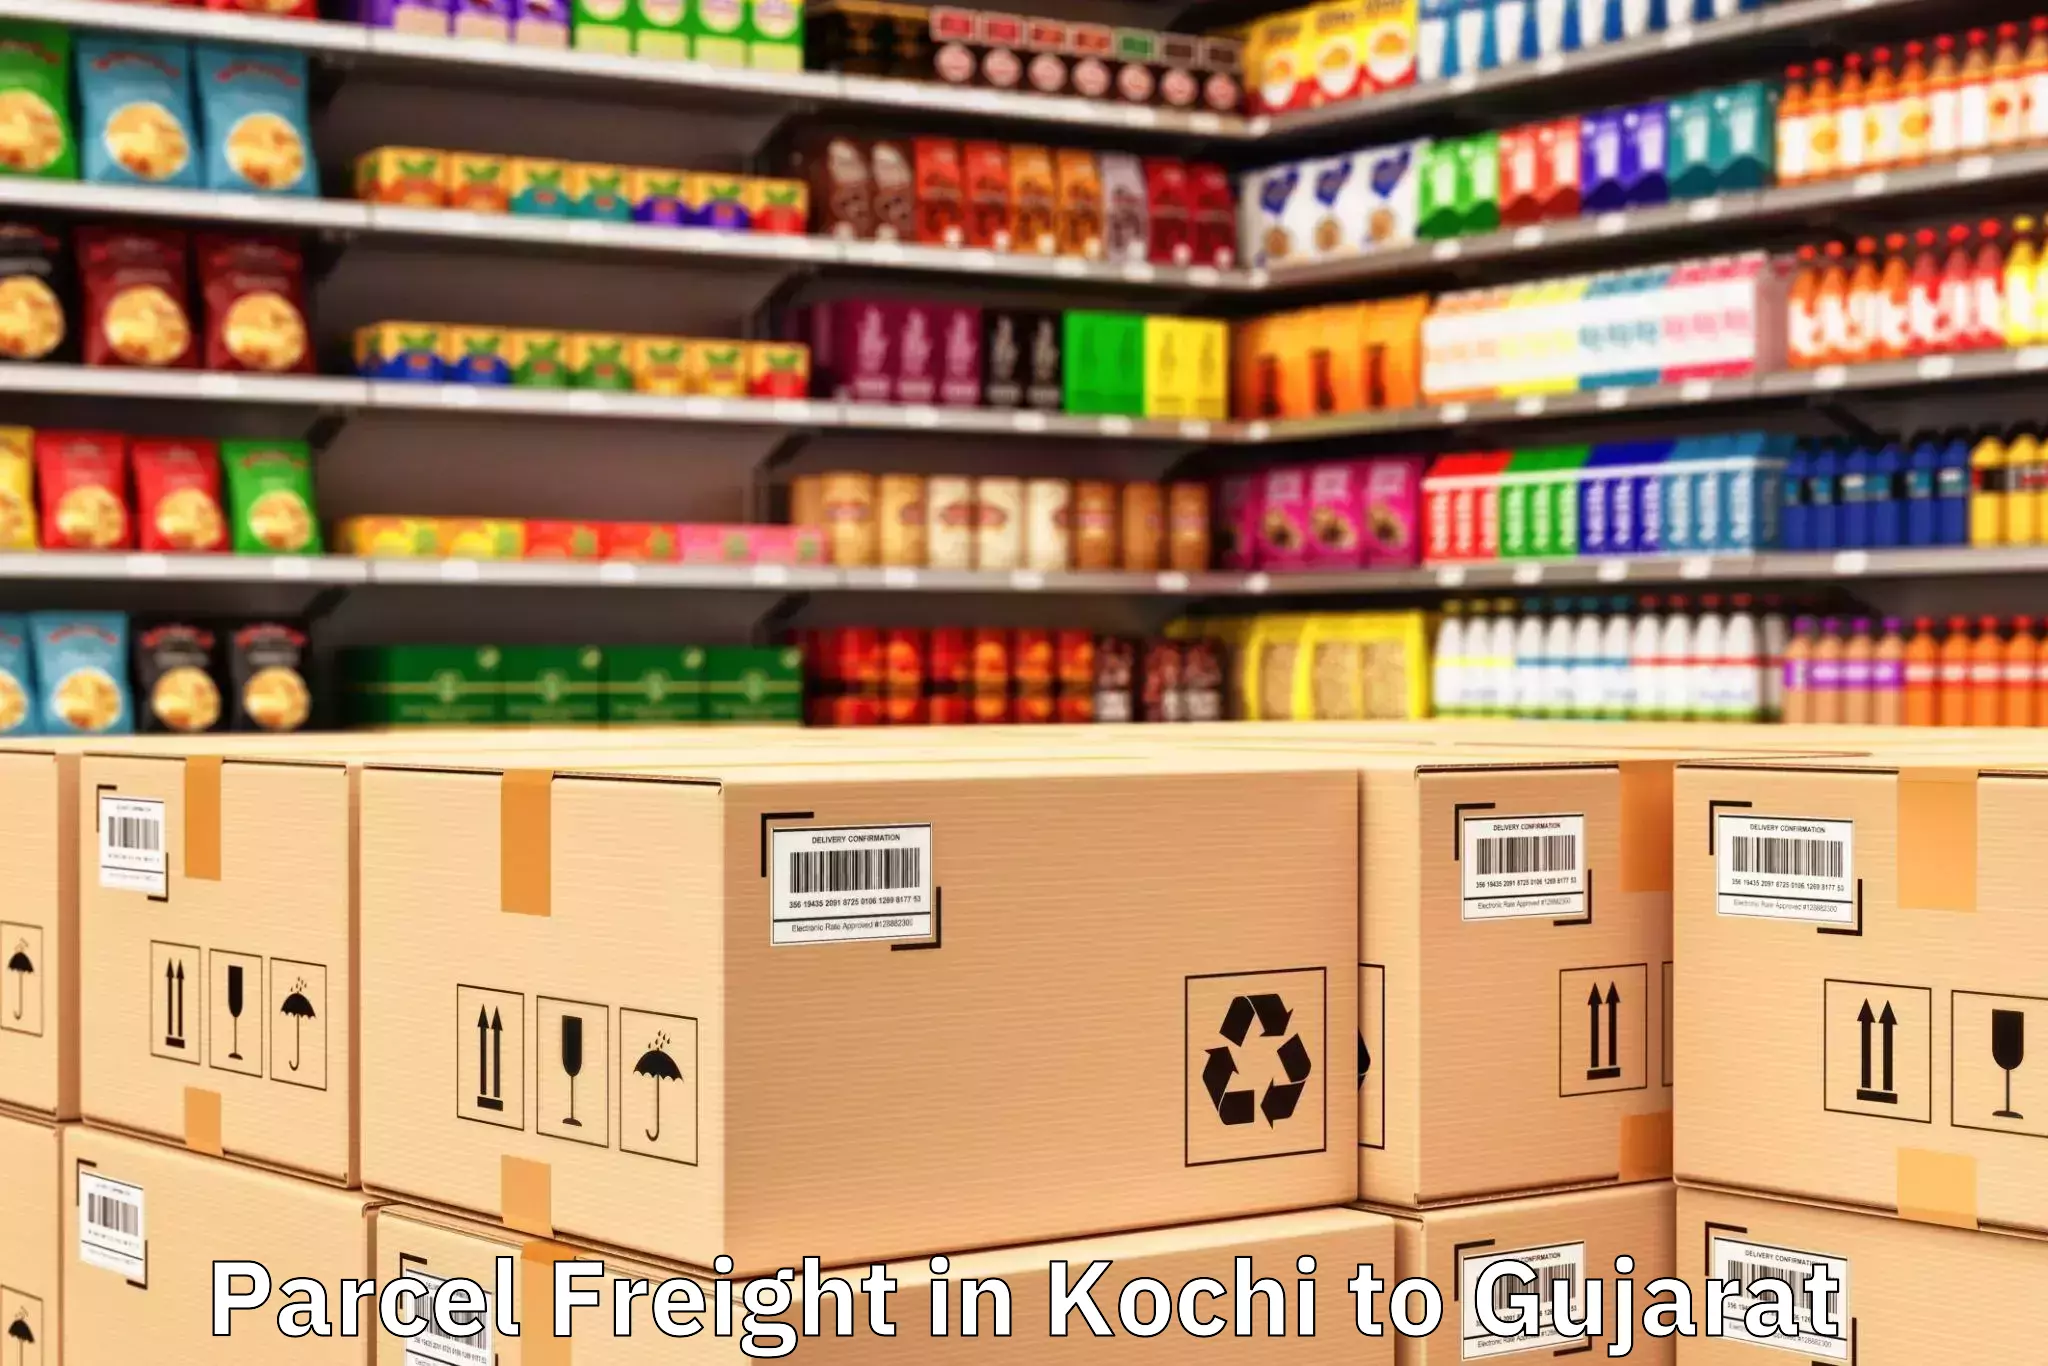 Expert Kochi to Lakhtar Parcel Freight